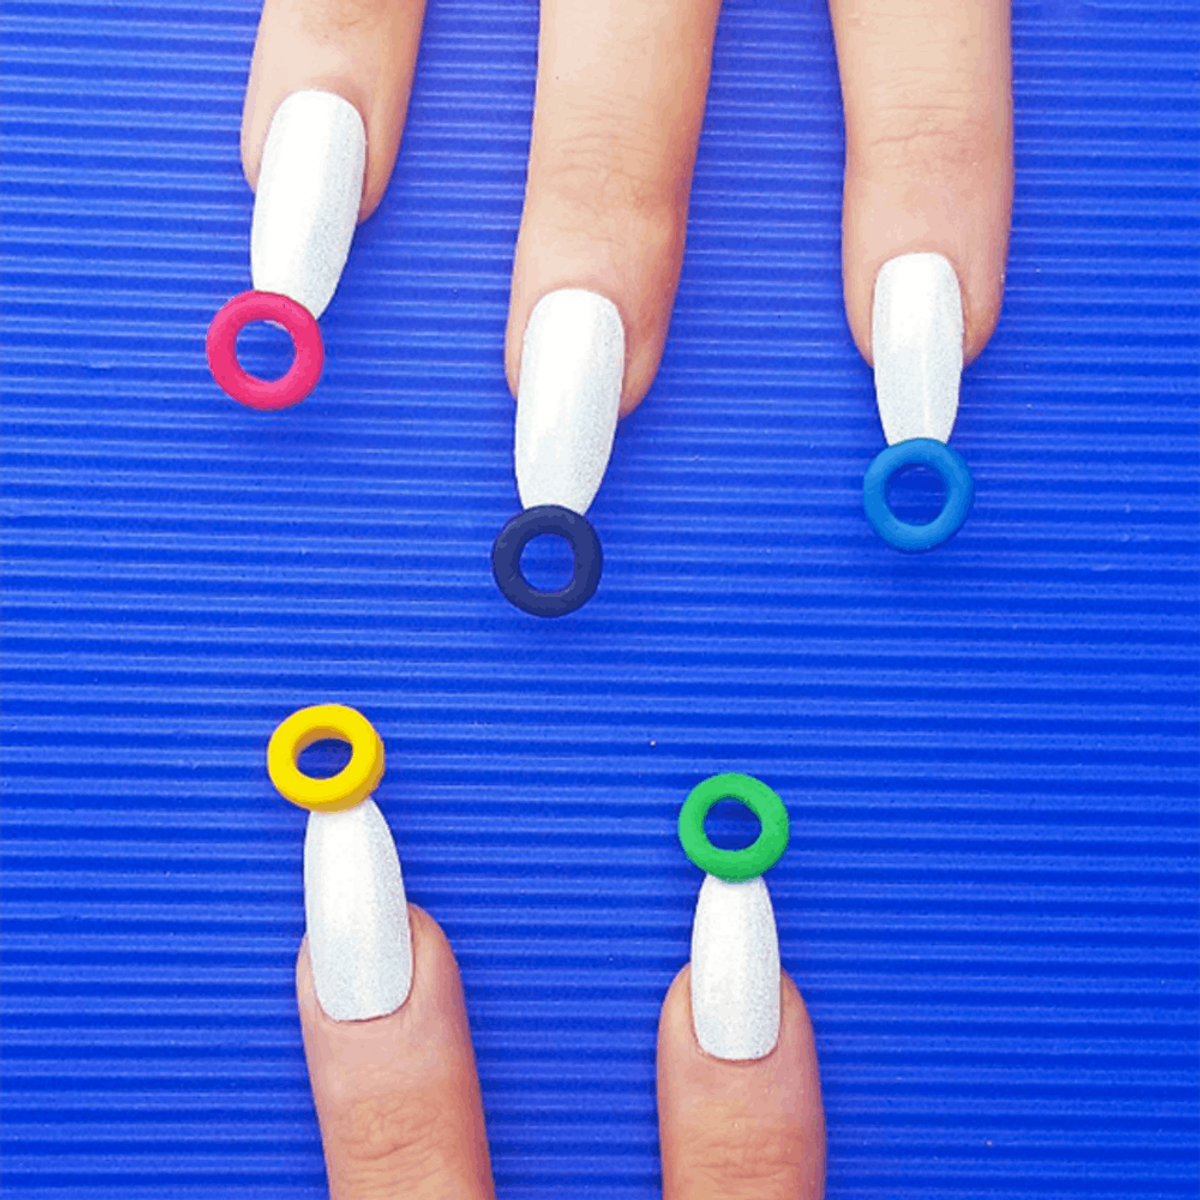 Go for Gold With These Rio-Ready Olympic Manicures